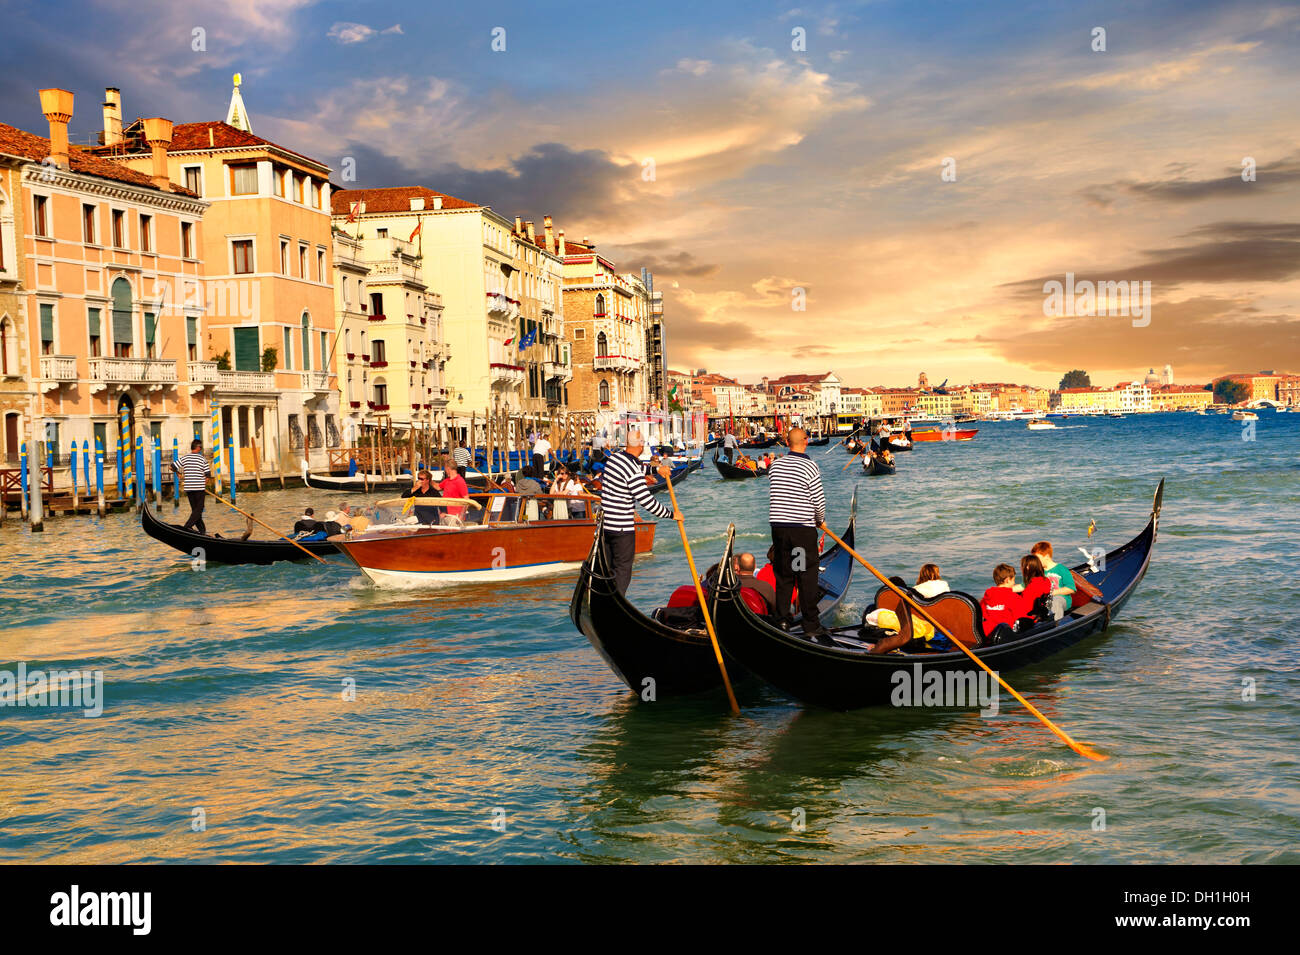 Gondolas on the Grand Canal near St Marks Square at sunset , Venice, Italy Stock Photo